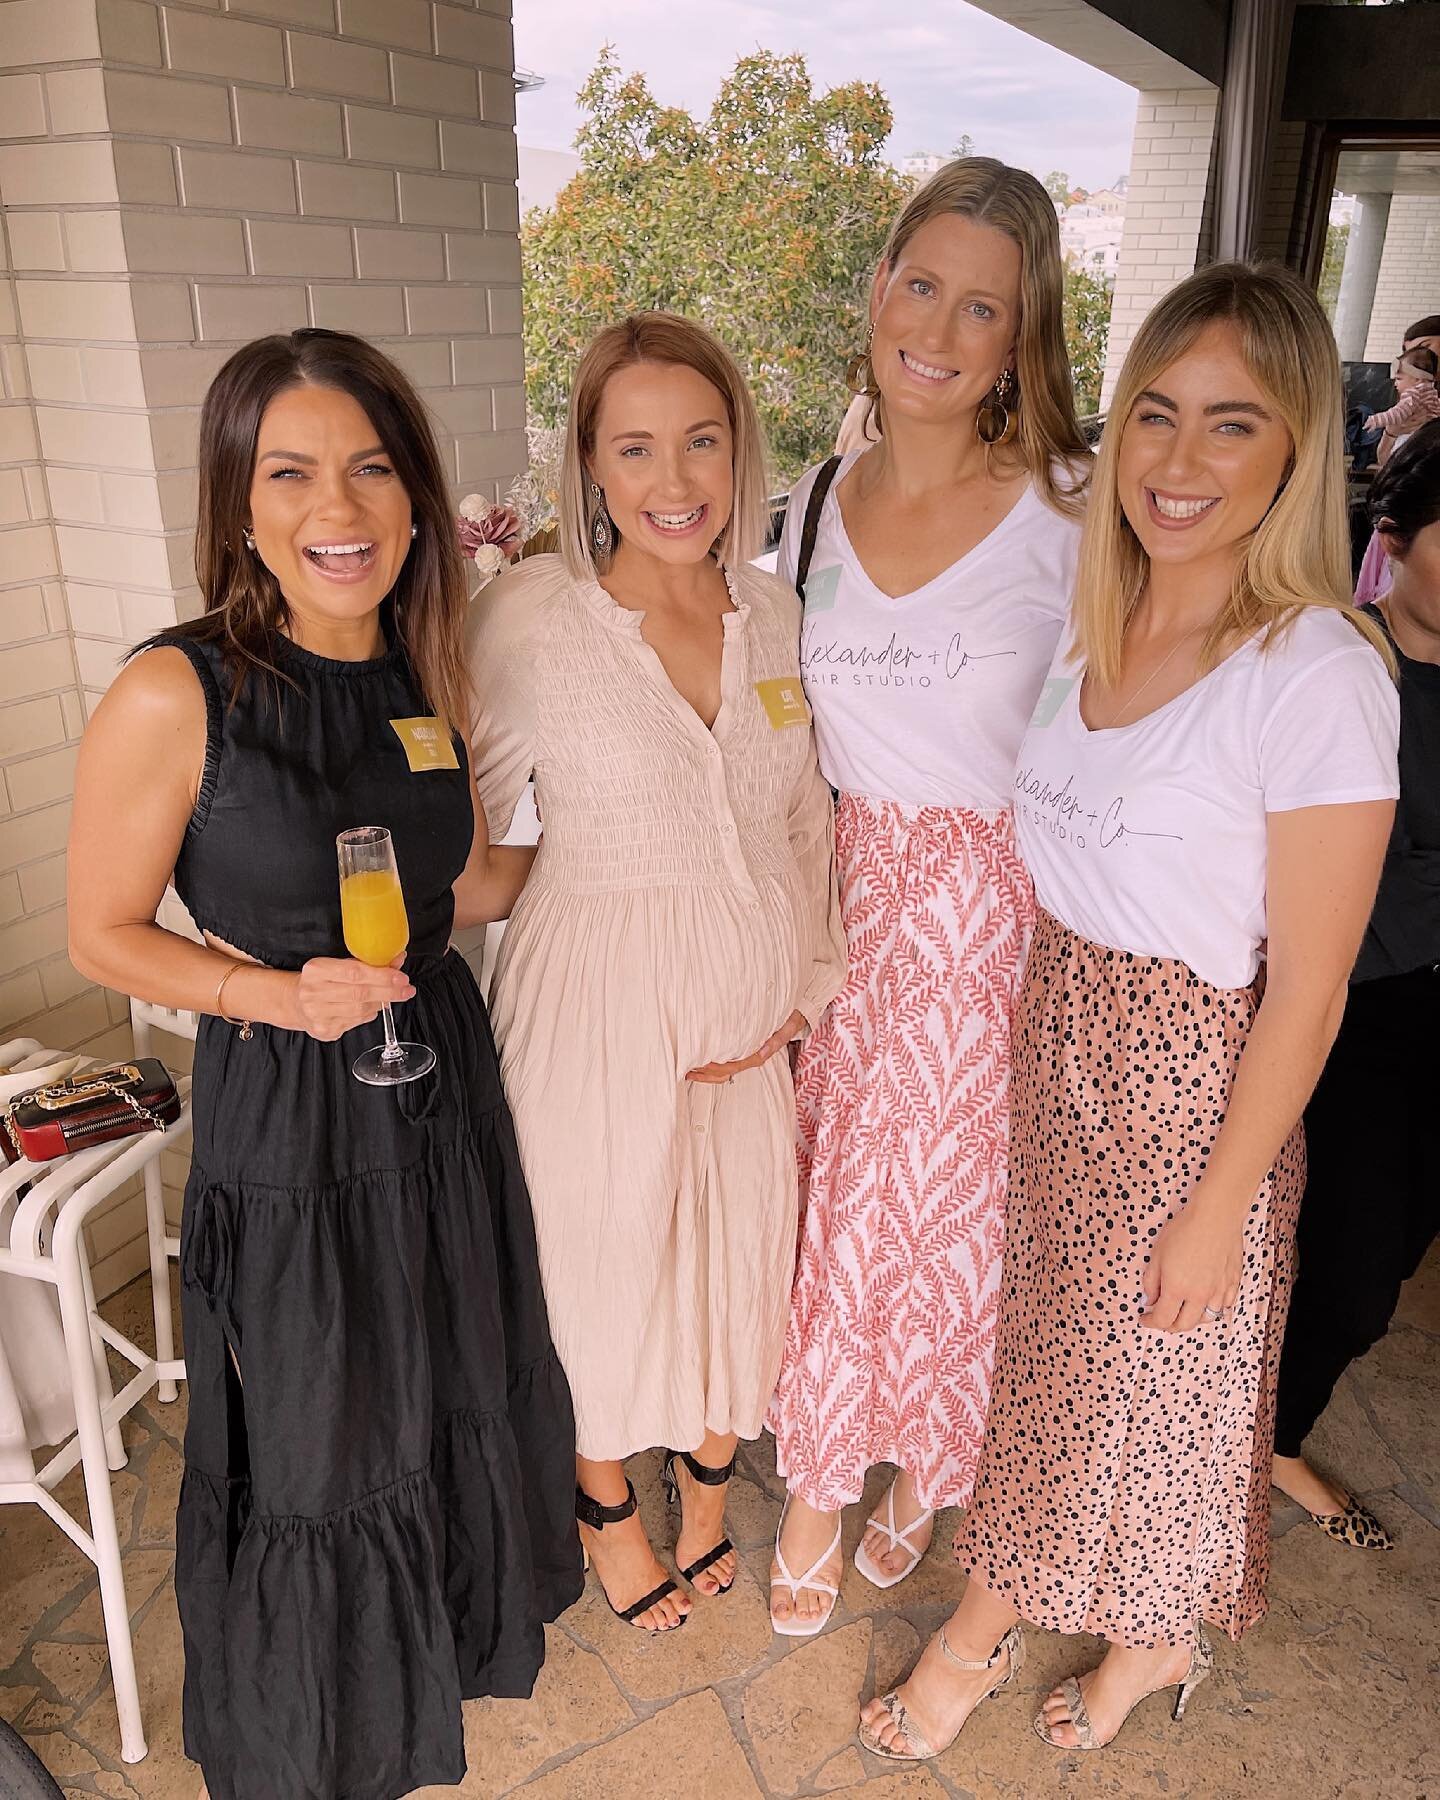 Last week we had the pleasure of not only attending the launch of @brunchbabiesandbubbles but also being able to support them by being a sponsor 🤍 

It was a lovely afternoon at @thecalilehotel being surrounded by likeminded mums &amp; their bubs 🥂